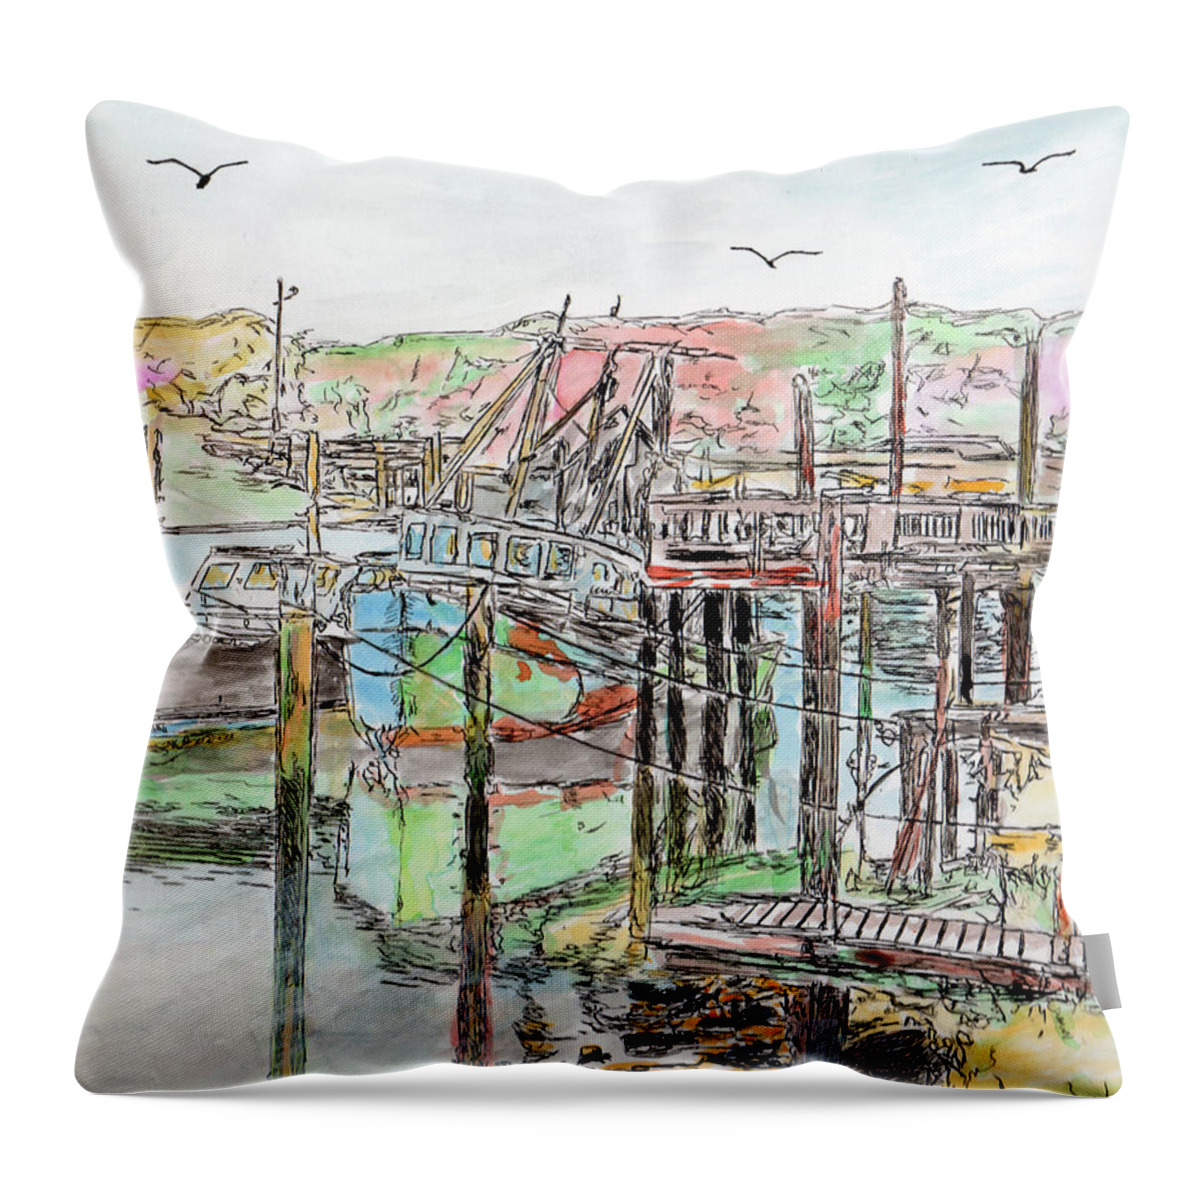 Rock Throw Pillow featuring the drawing Rock Harbor, Cape Cod, Massachusetts by Michele A Loftus